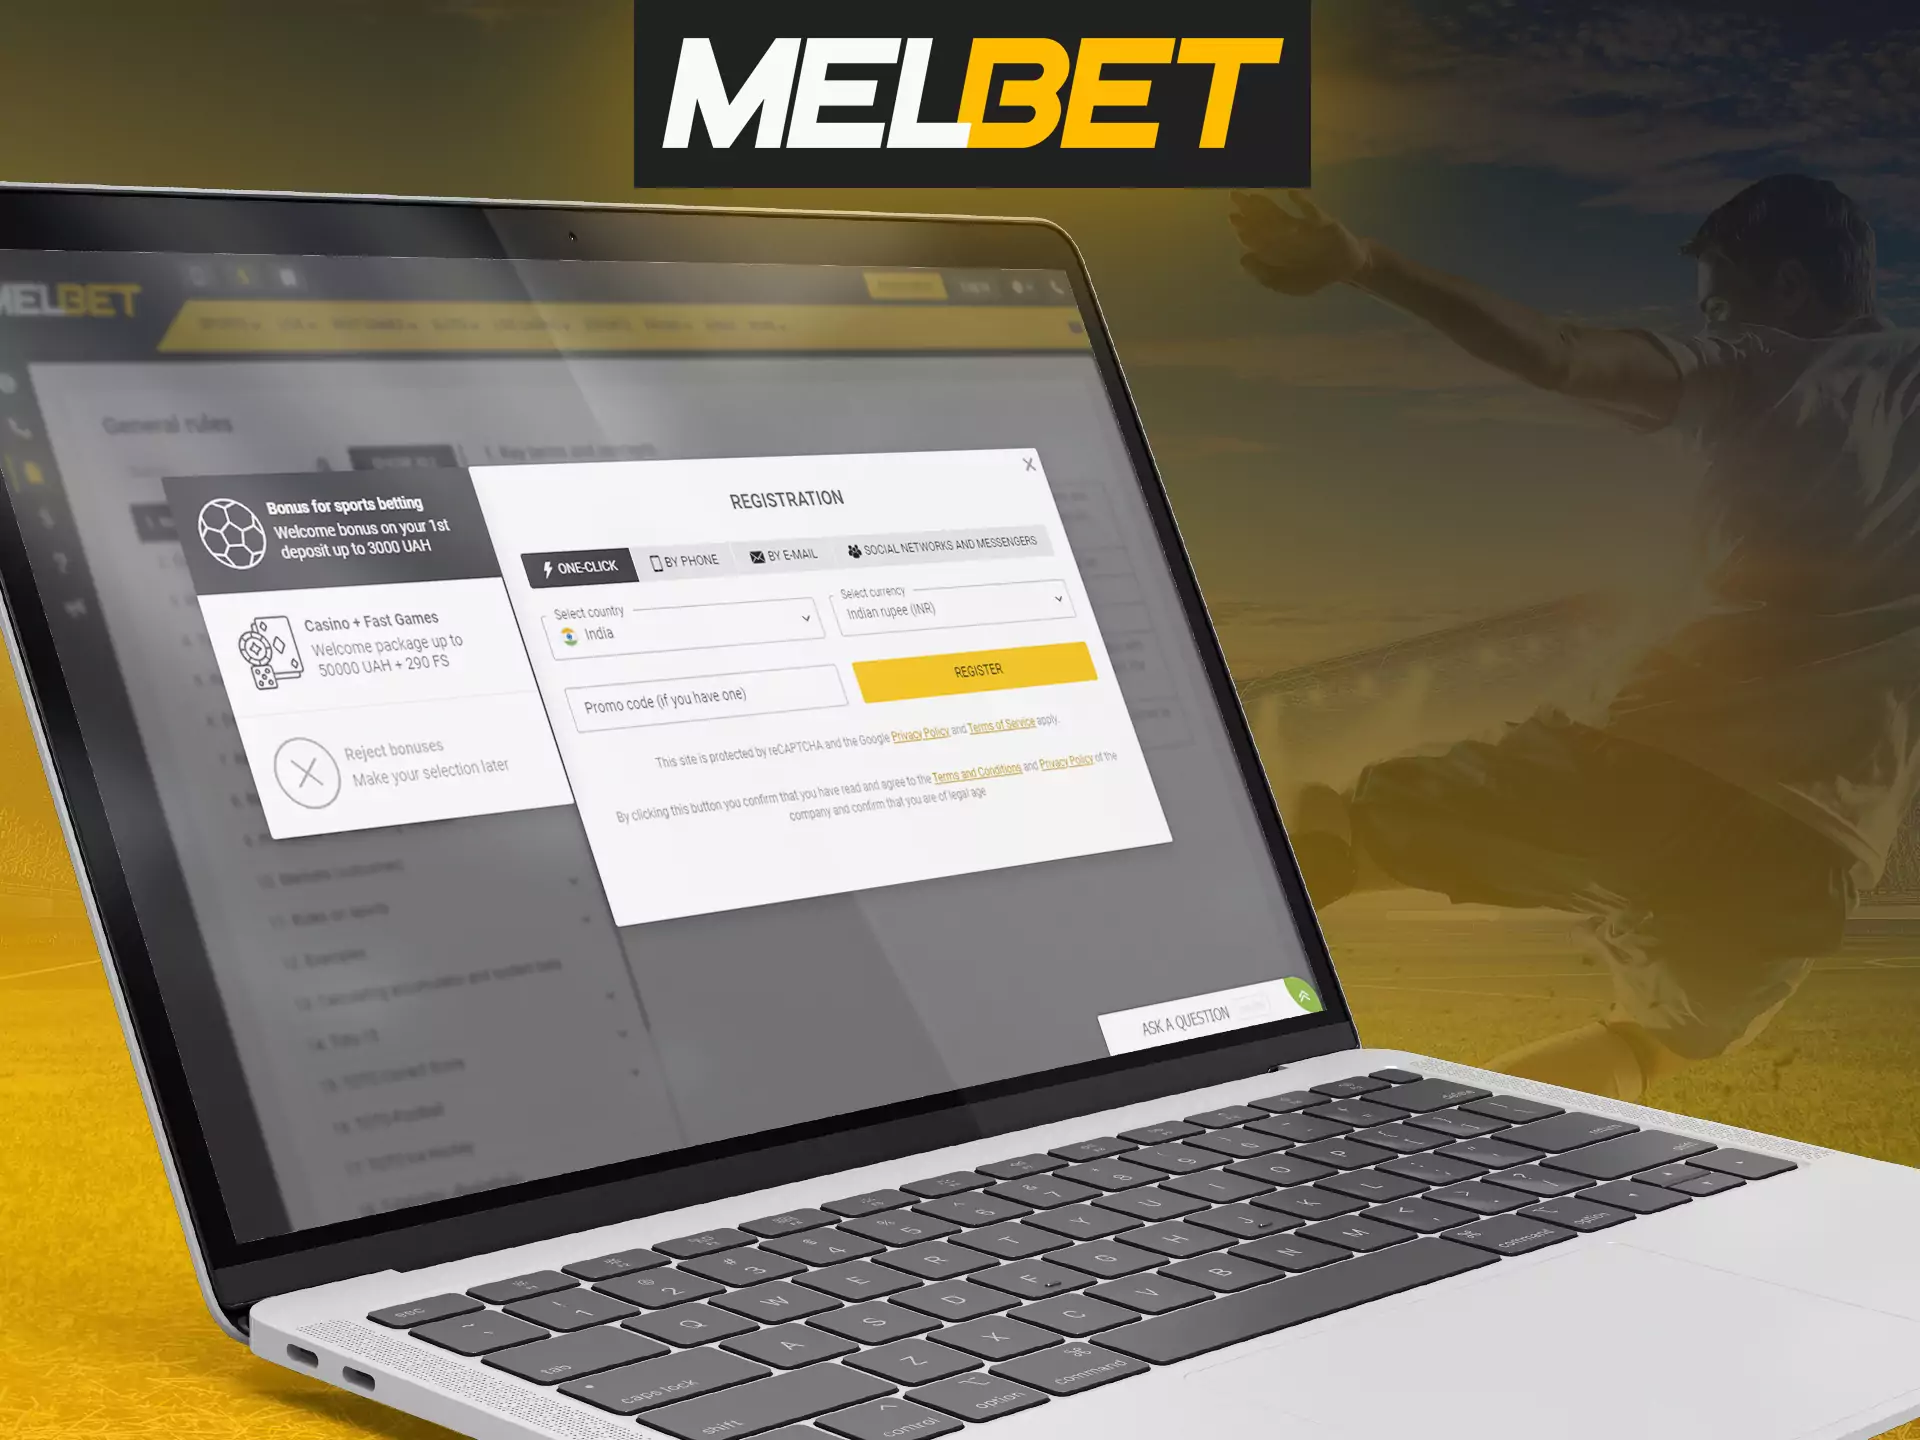 Open registration window and make your own account at Melbet.